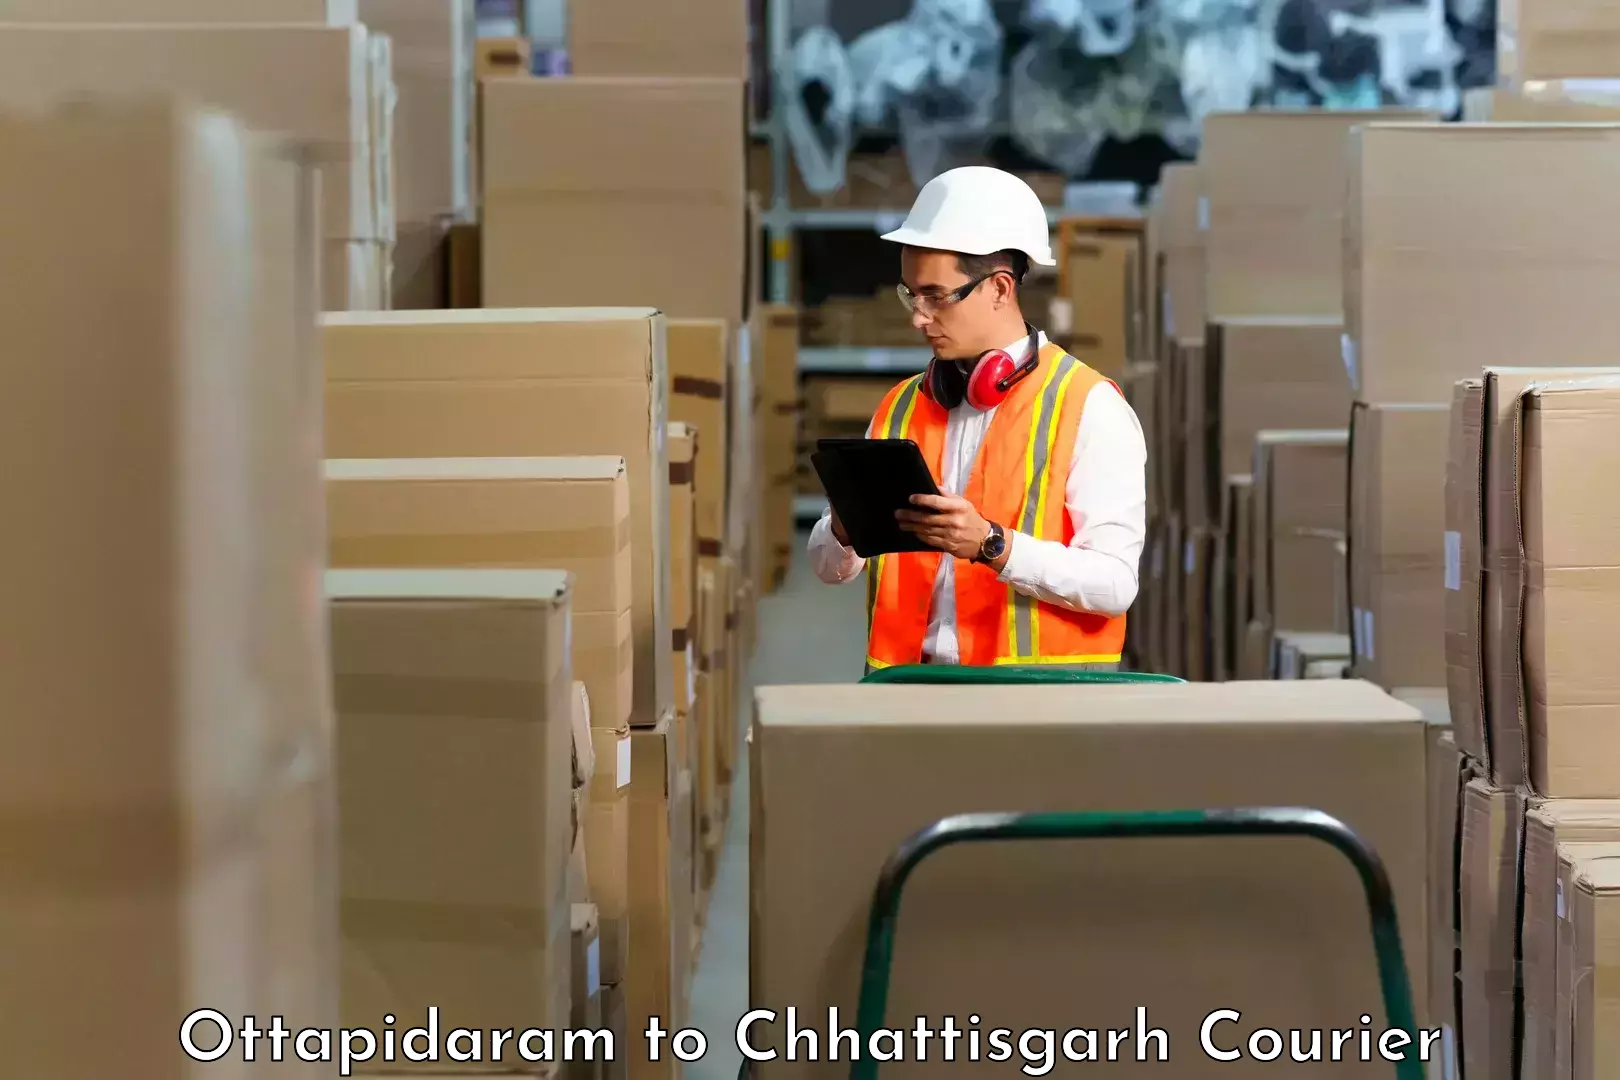 Parcel service for businesses in Ottapidaram to bagbahra